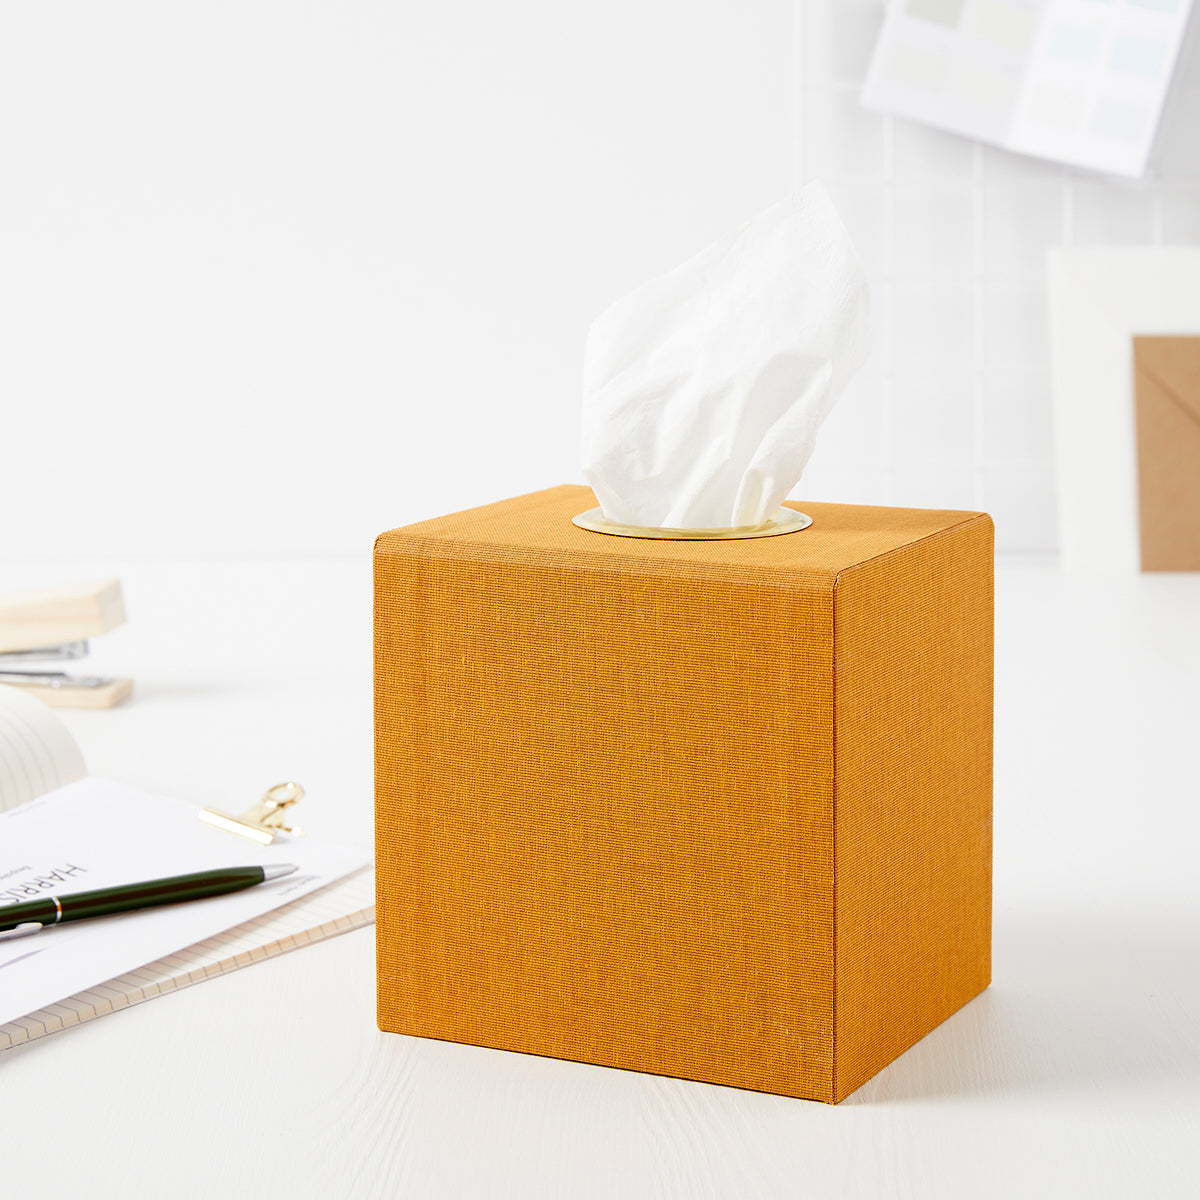 Fabric Tissue Boxes